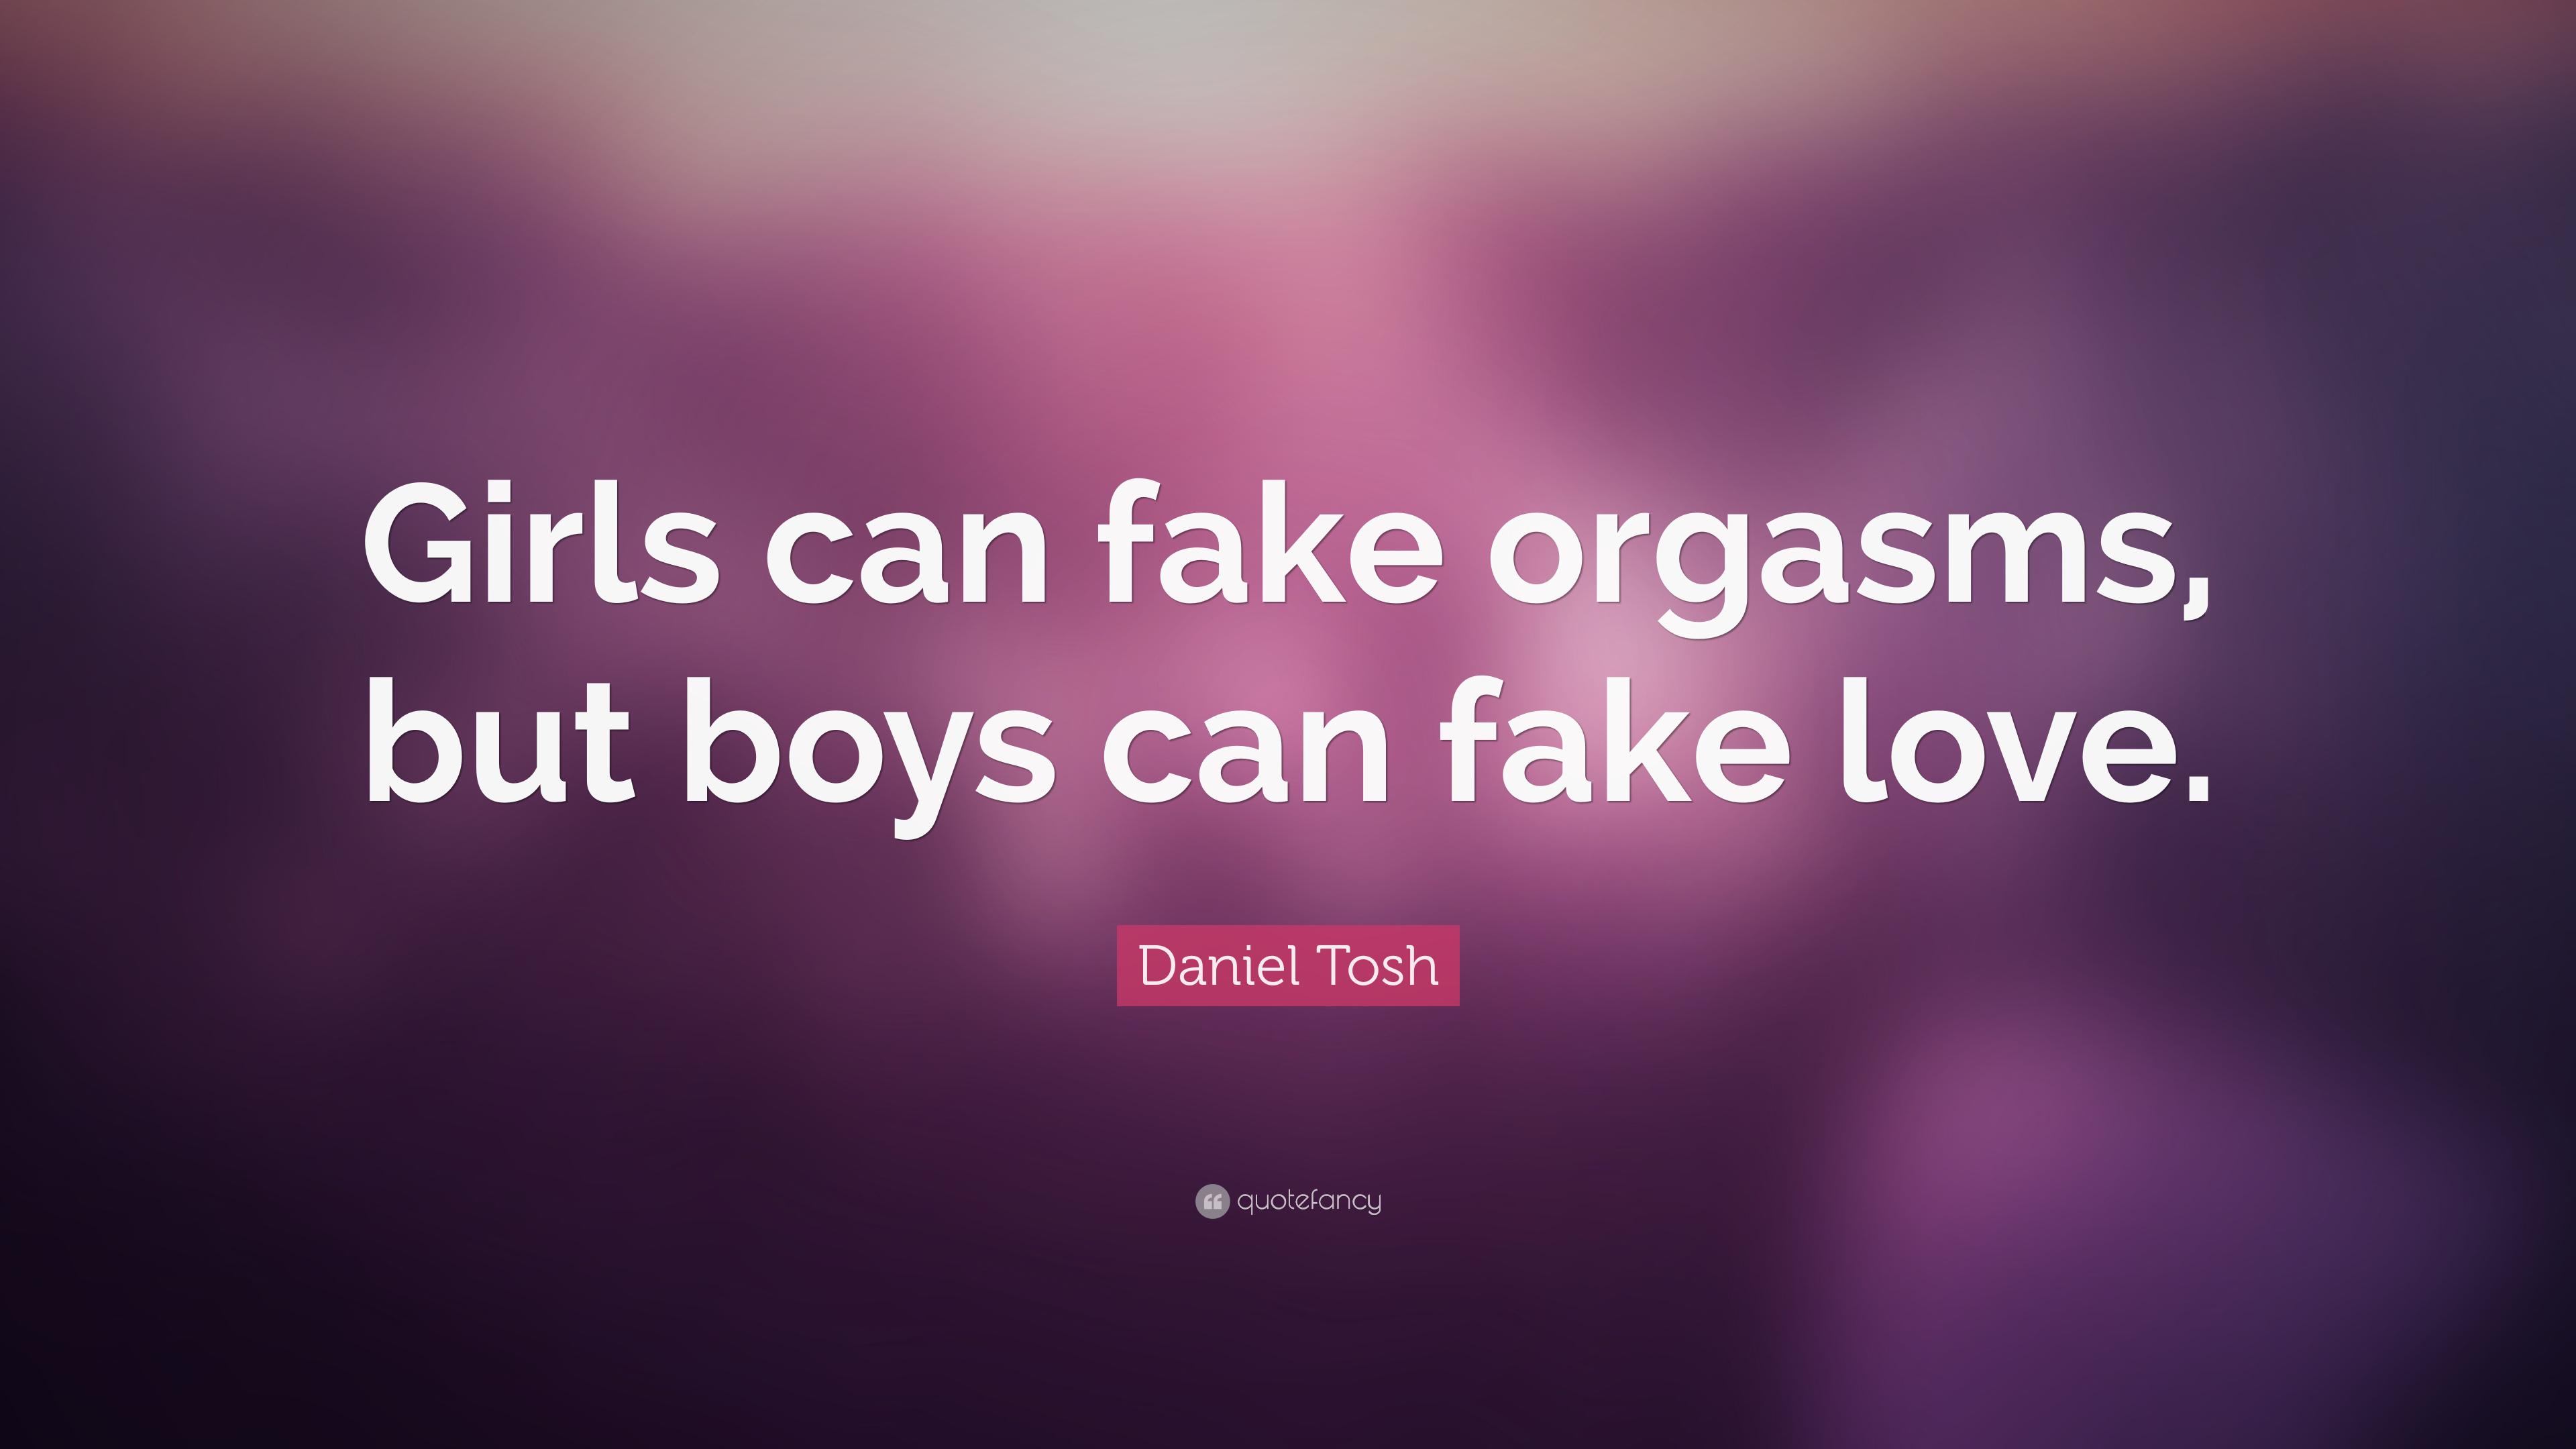 Daniel Tosh Quote: “Girls can fake orgasms, but boys can fake love